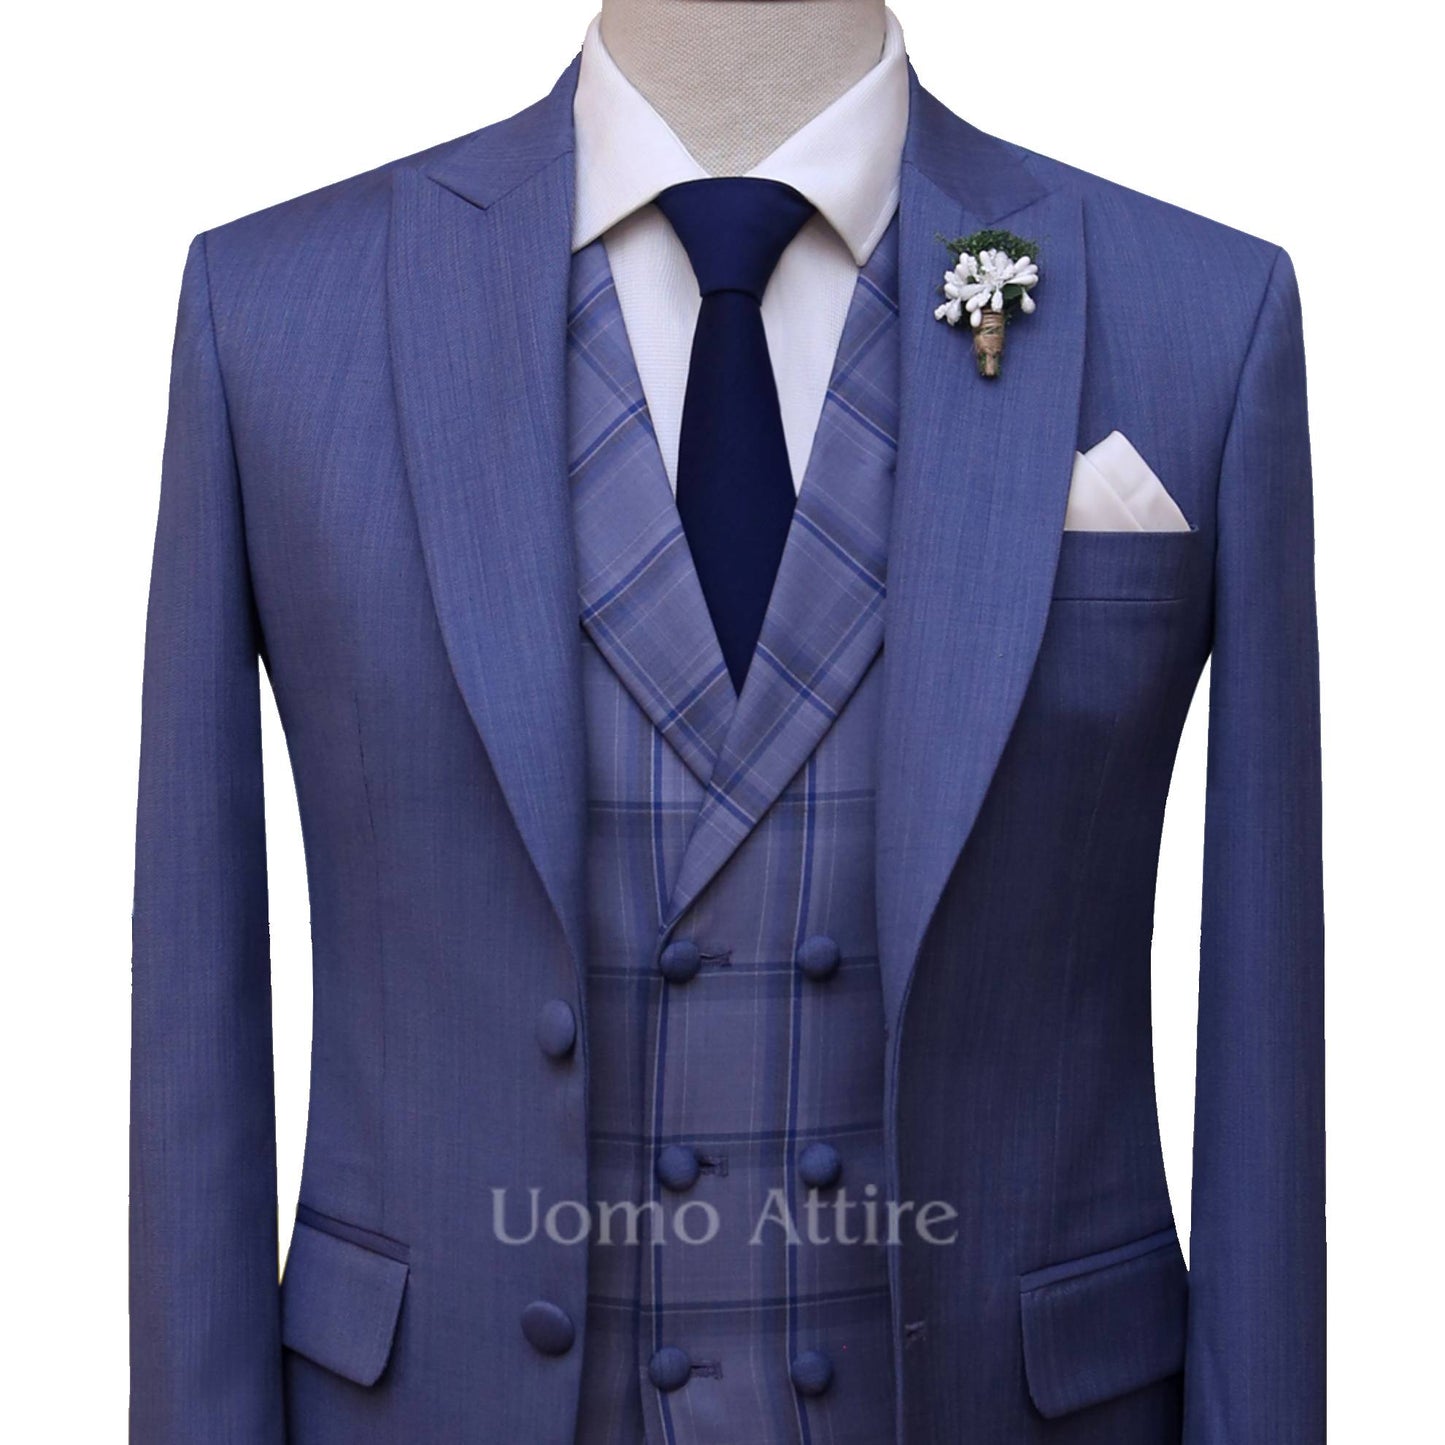 Woolen fabric three piece suit for wedding, blue suit for wedding